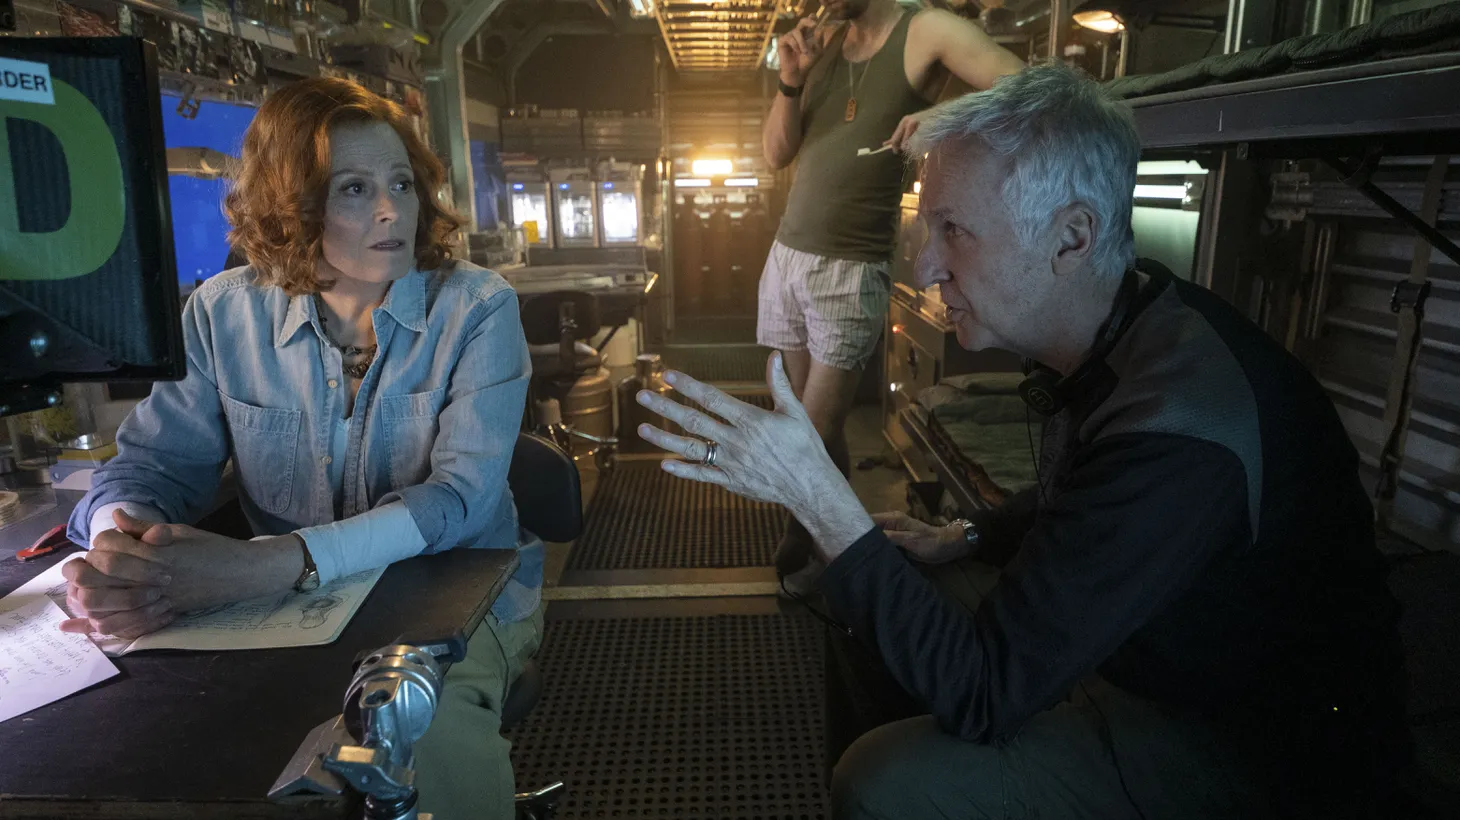 Director James Cameron (R) talks with actors Sigourney Weaver (L) and Joel David Moore on the set of “Avatar: The Way of Water.”